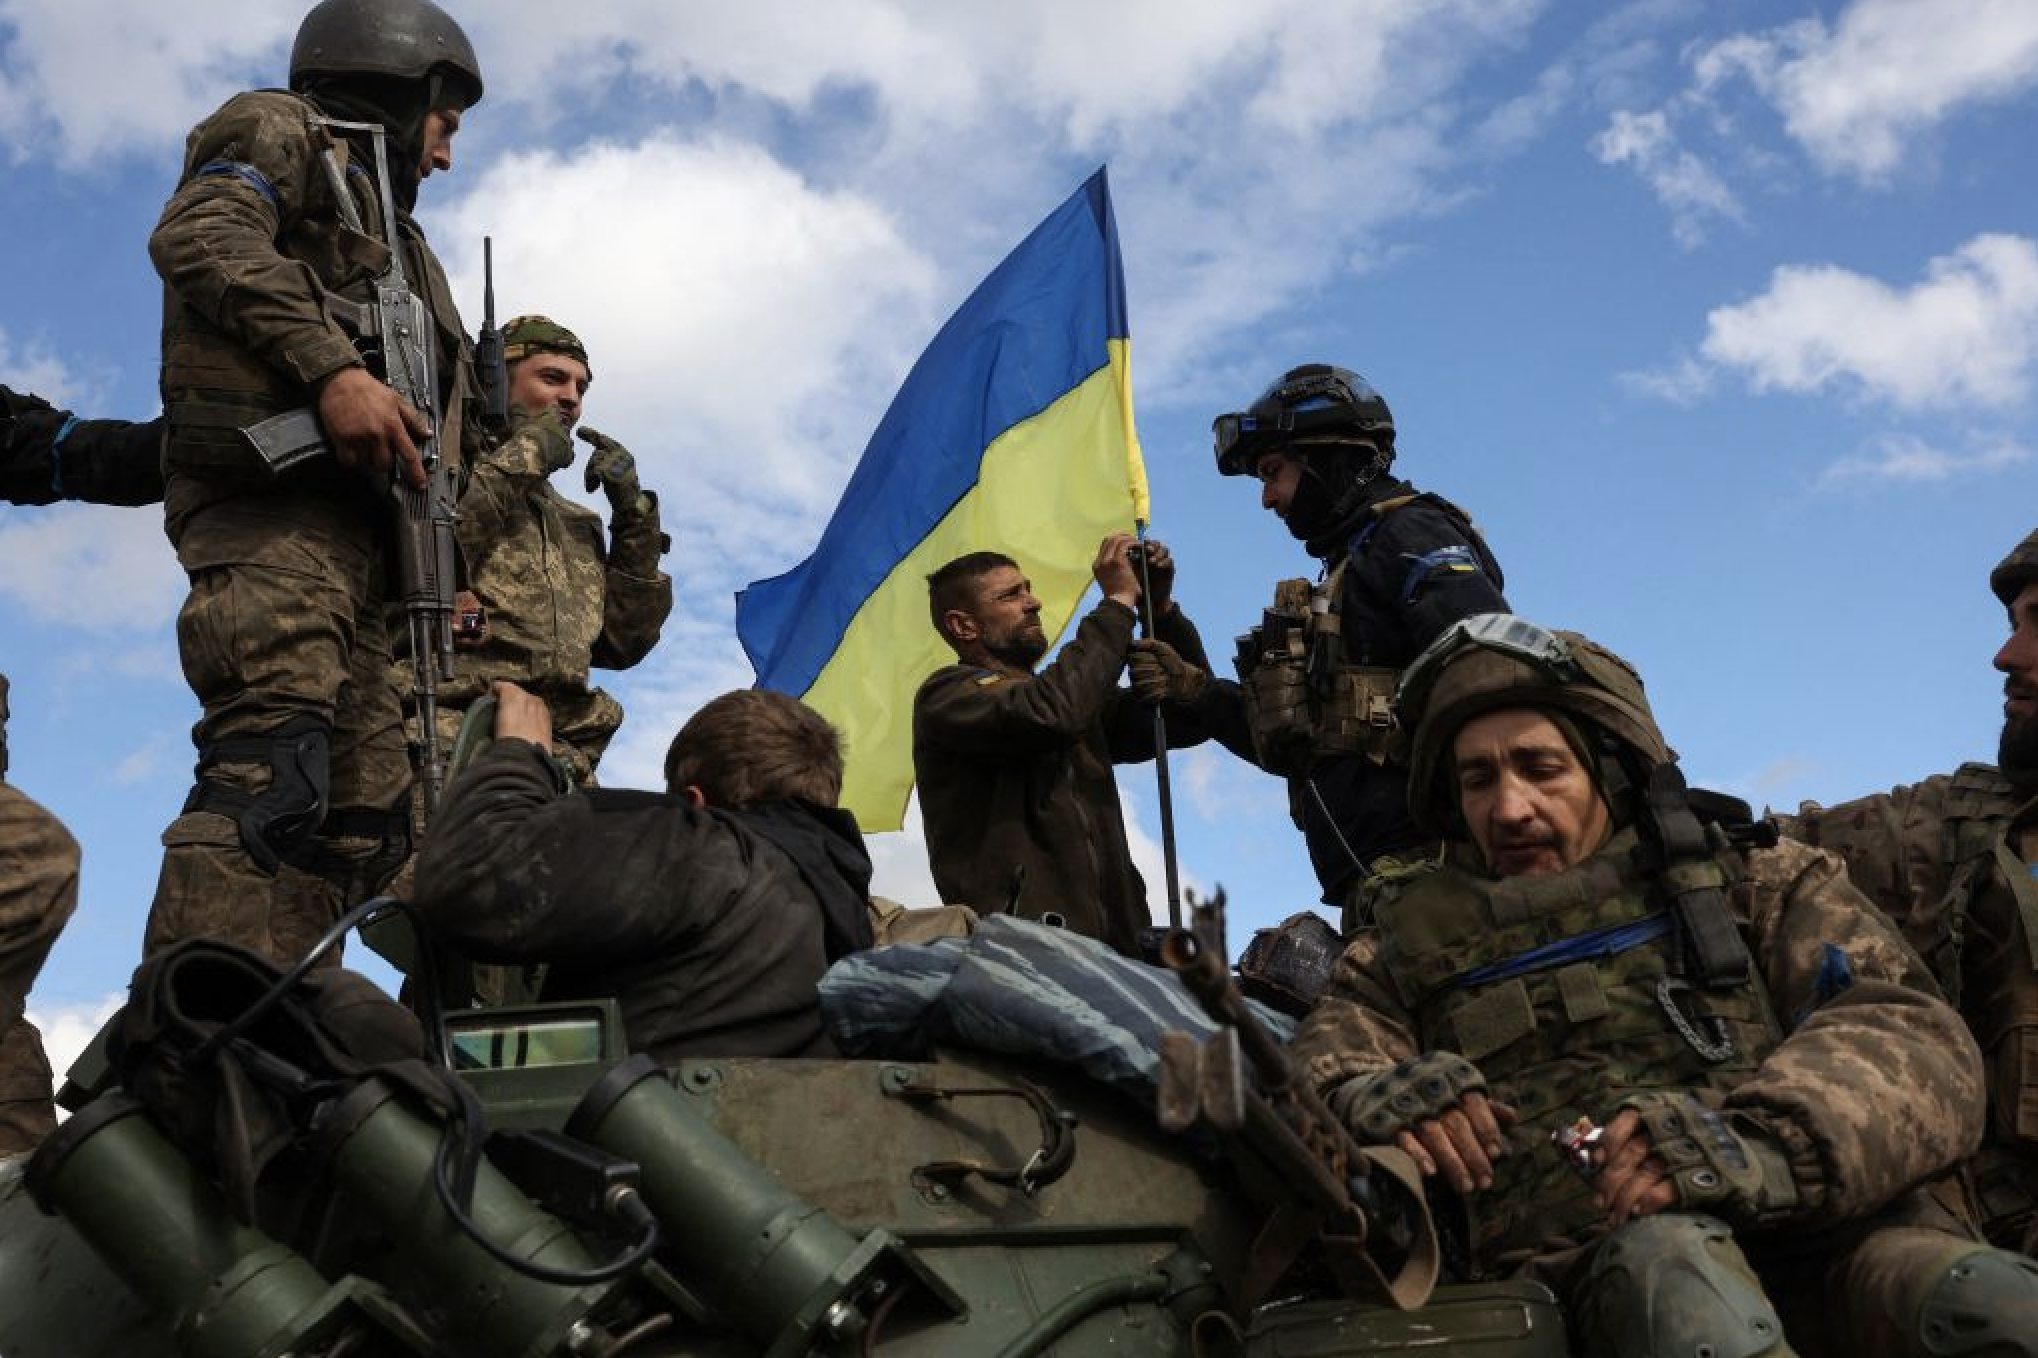 Ukraine to receive additional munitions in $400 million US aid package